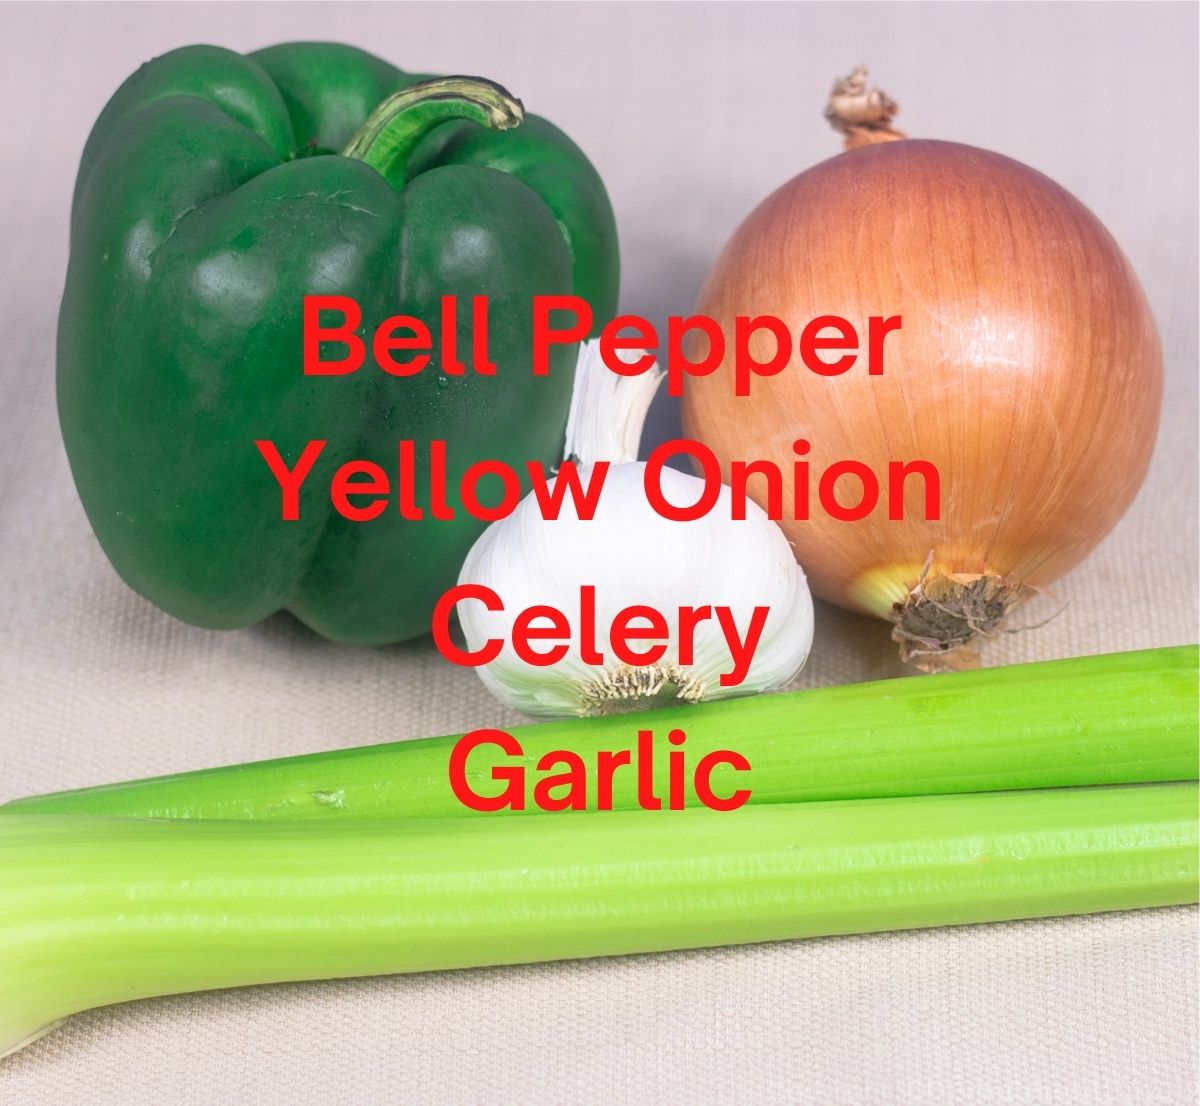 bell peppers, yellow onions, celery stalks and a whole garlic